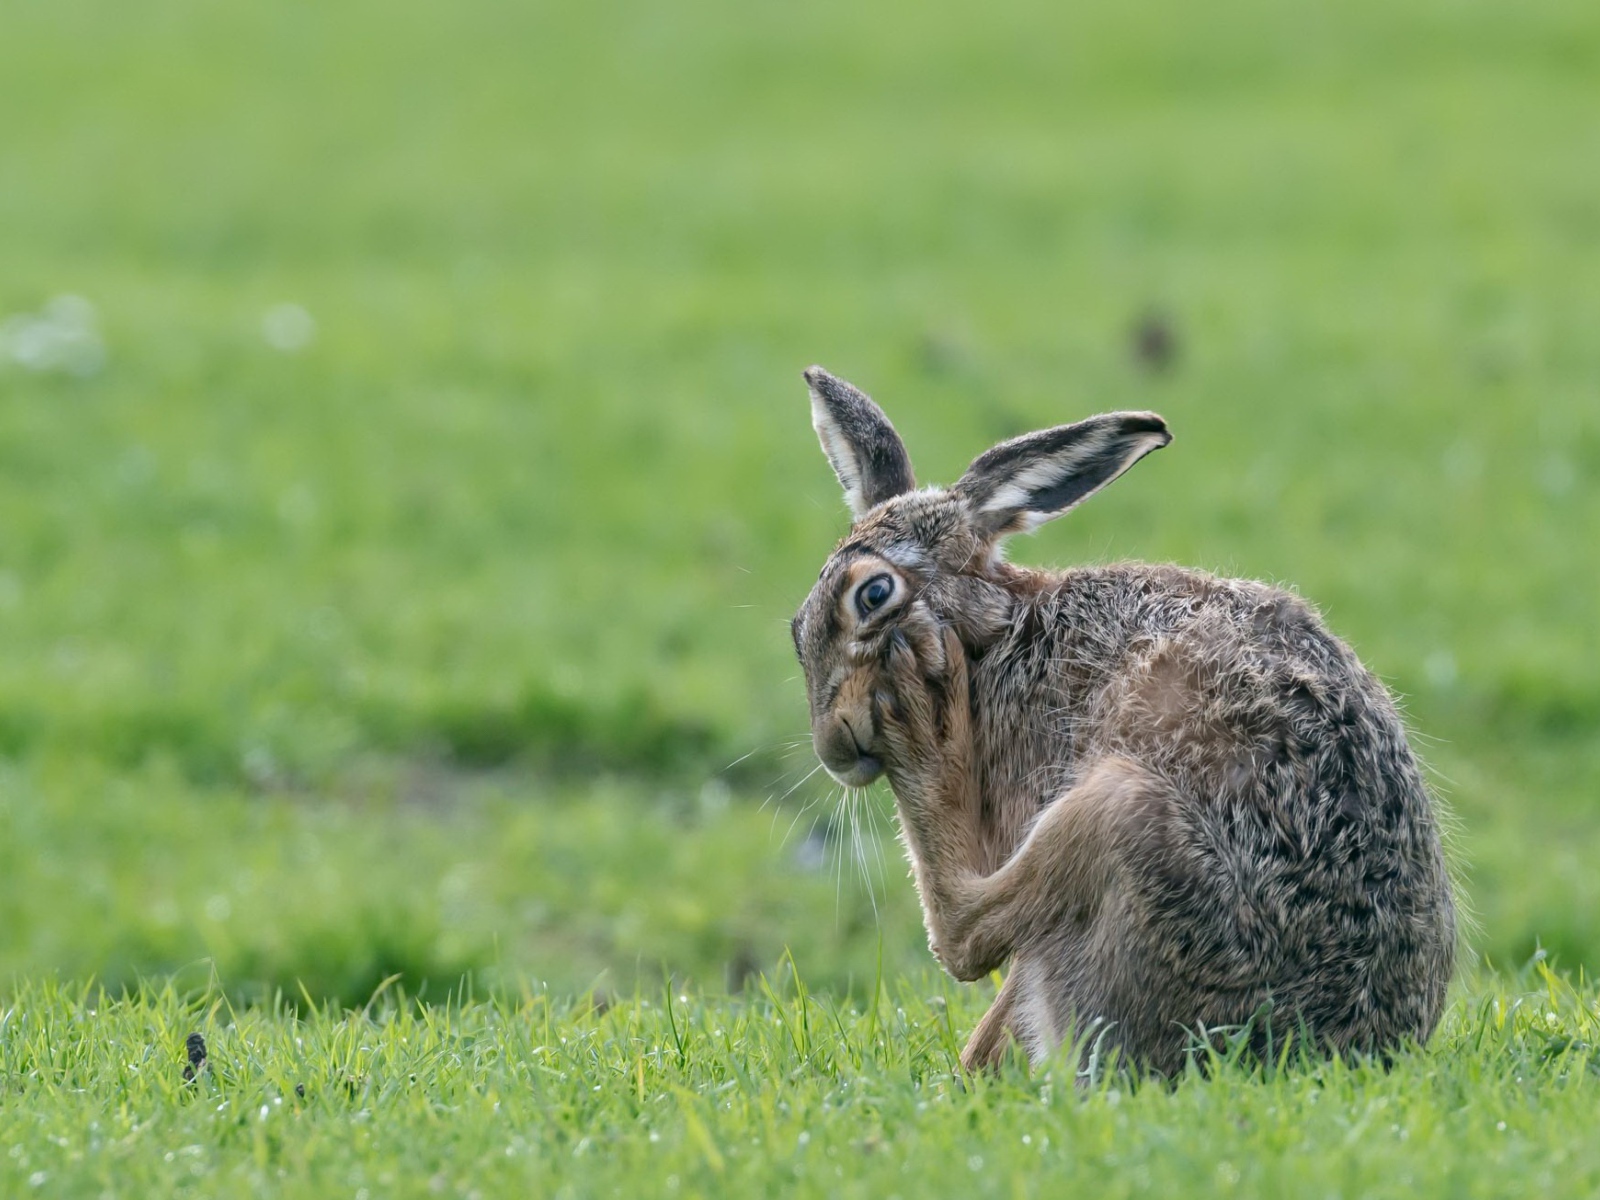 Big gray hare scratches a paw on green grass